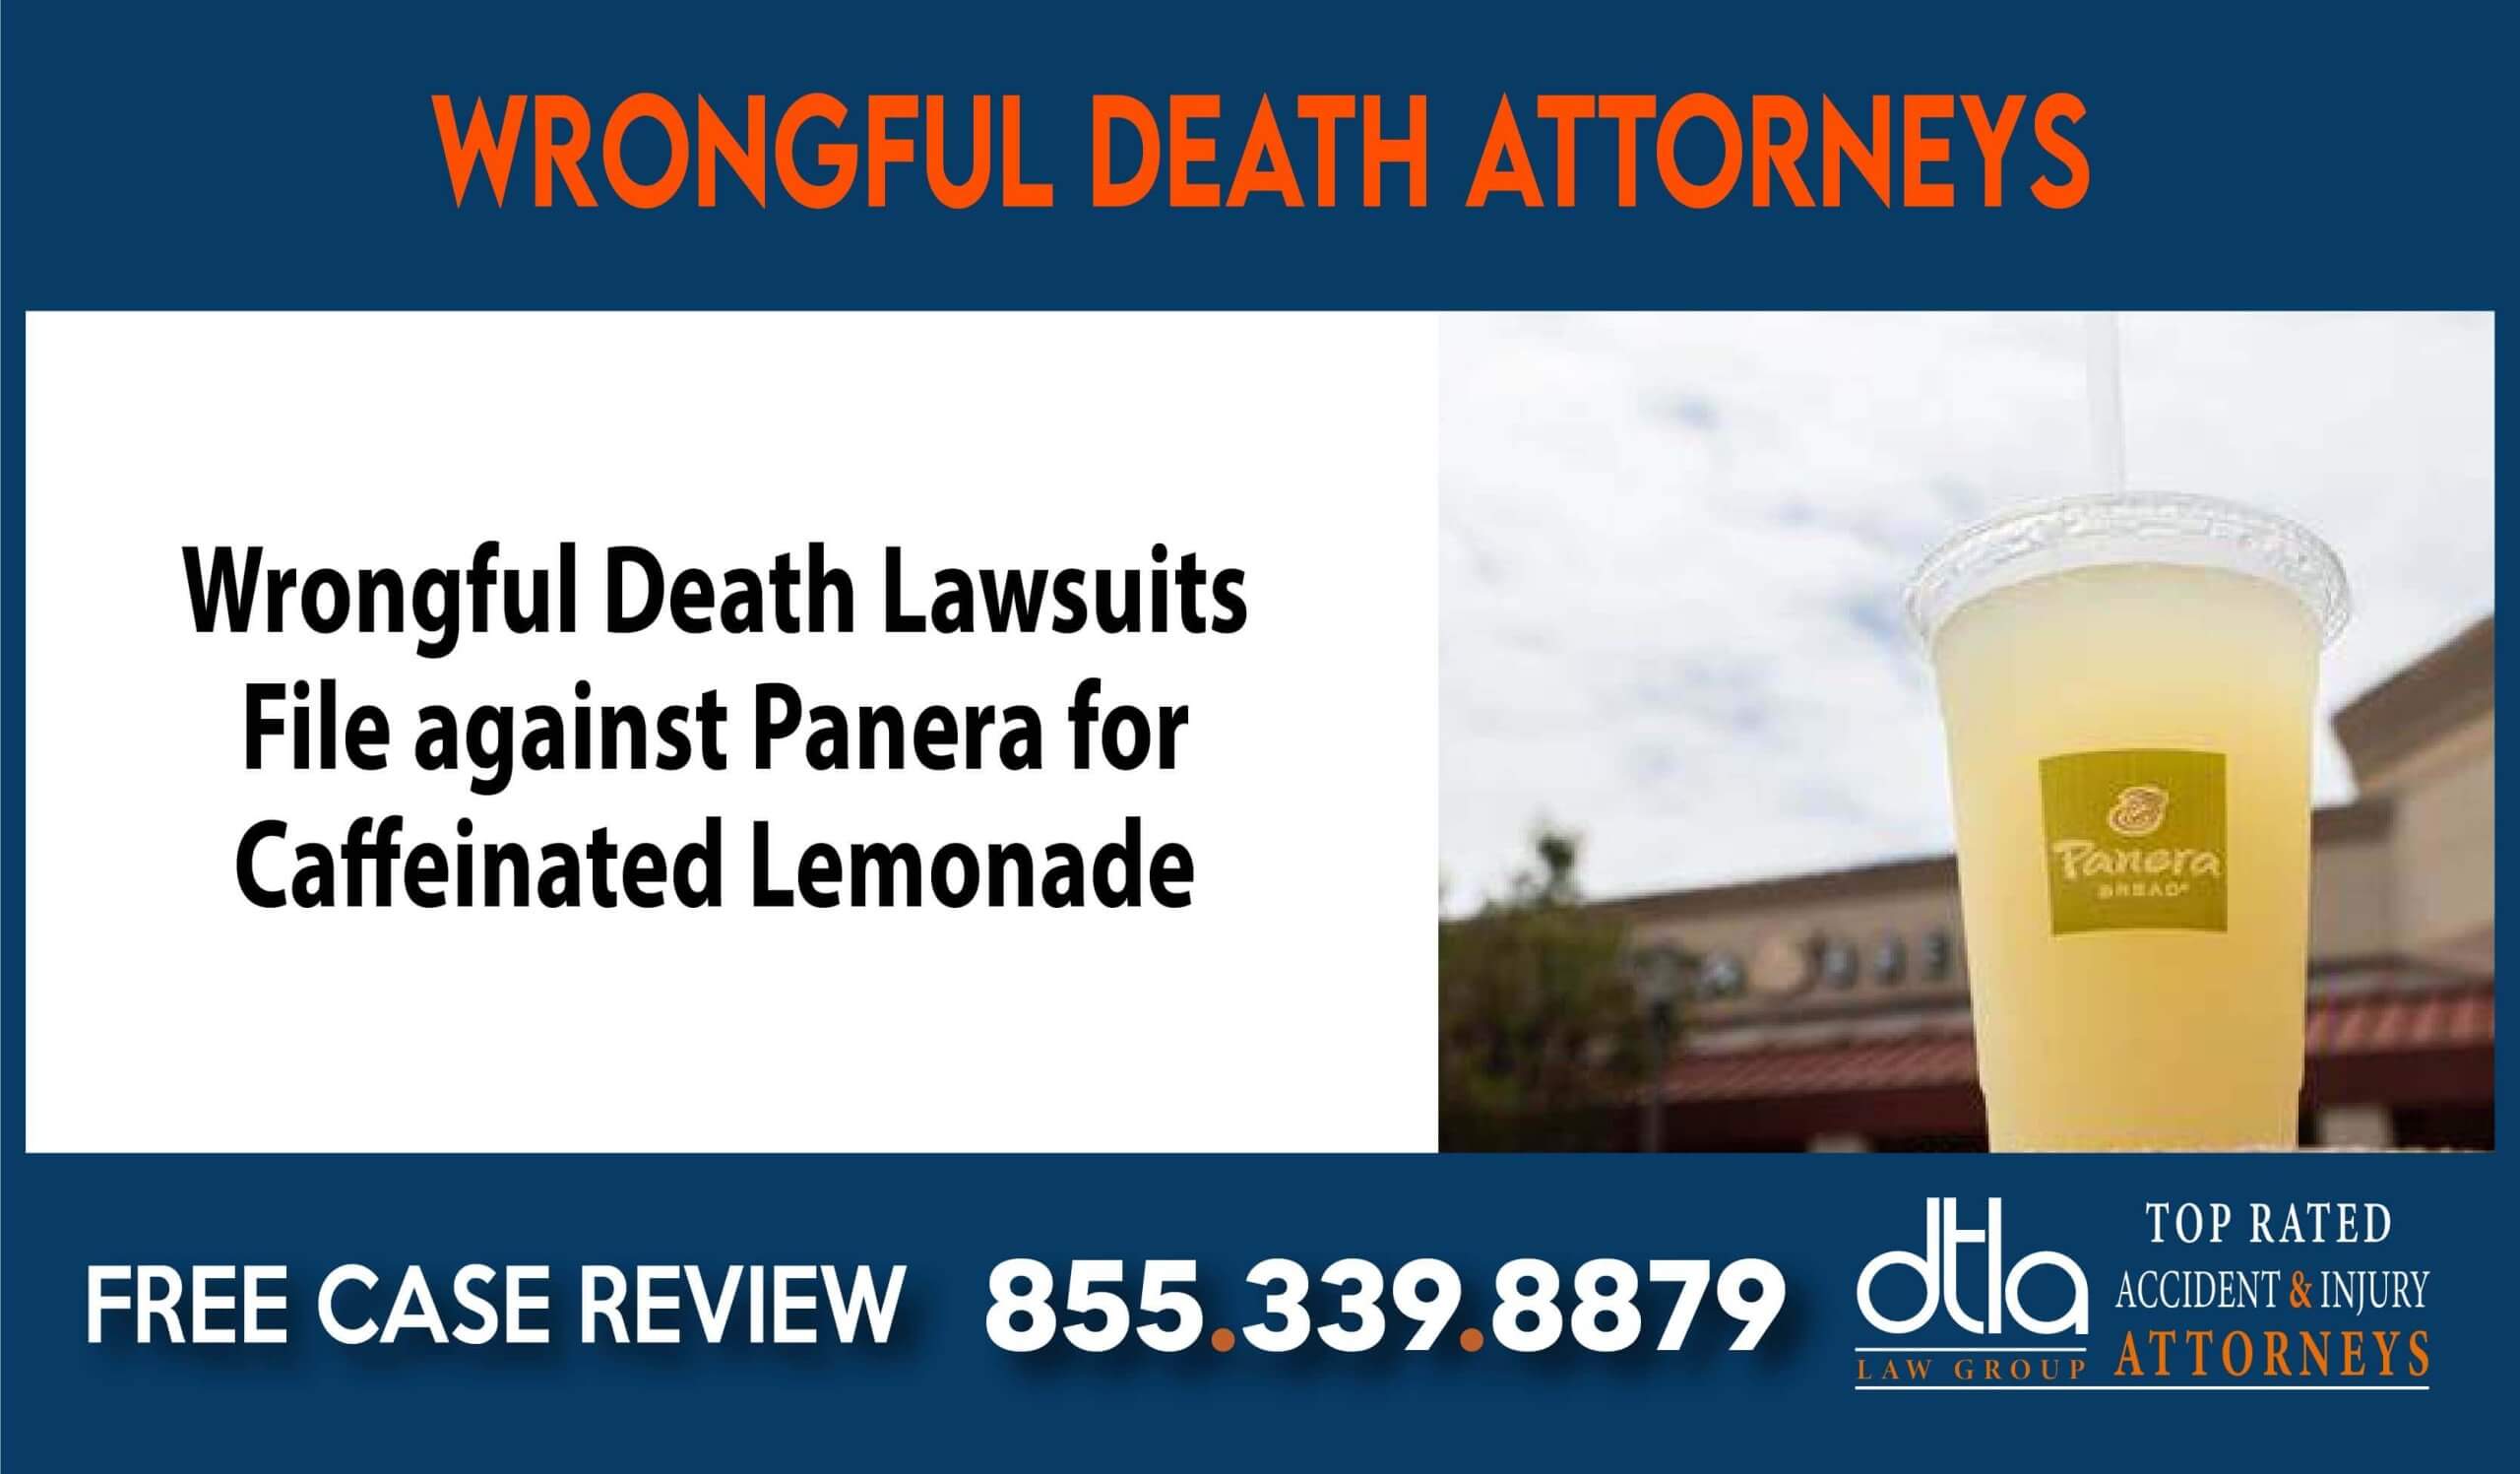 Wrongful Death Lawsuits Filed against Panera for Caffeinated Lemonade sue lawyer attorney compensation incident liability